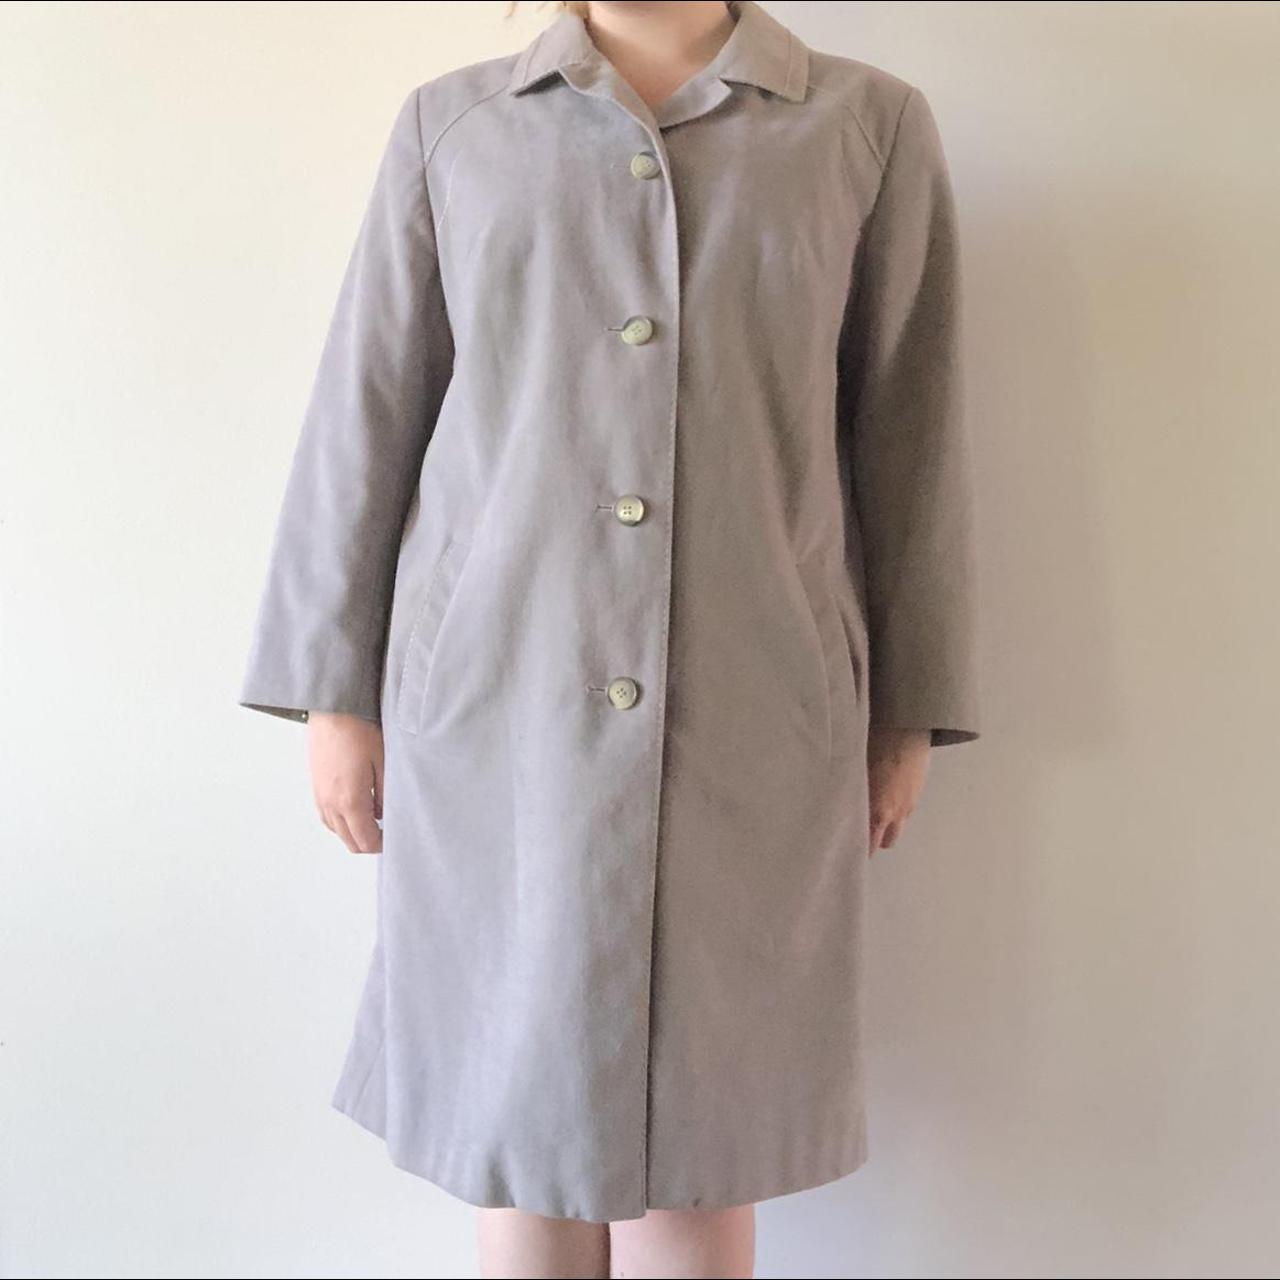 pierre bern trench coat. ☆ contrast stitching with... - Depop